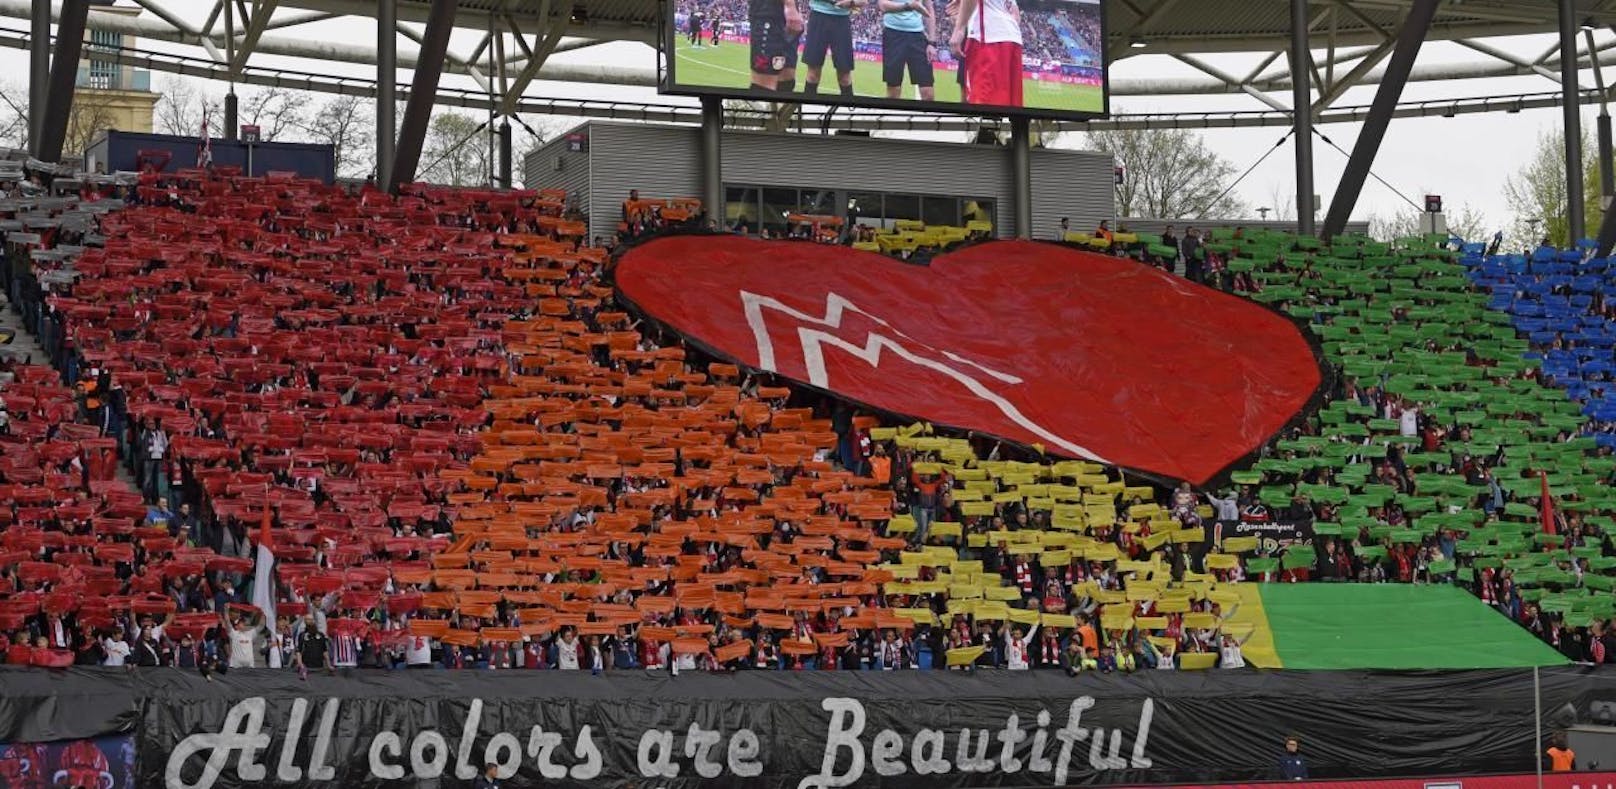  Leipziger Fanblock mit toller Choreografie: All Colors are Beautiful  